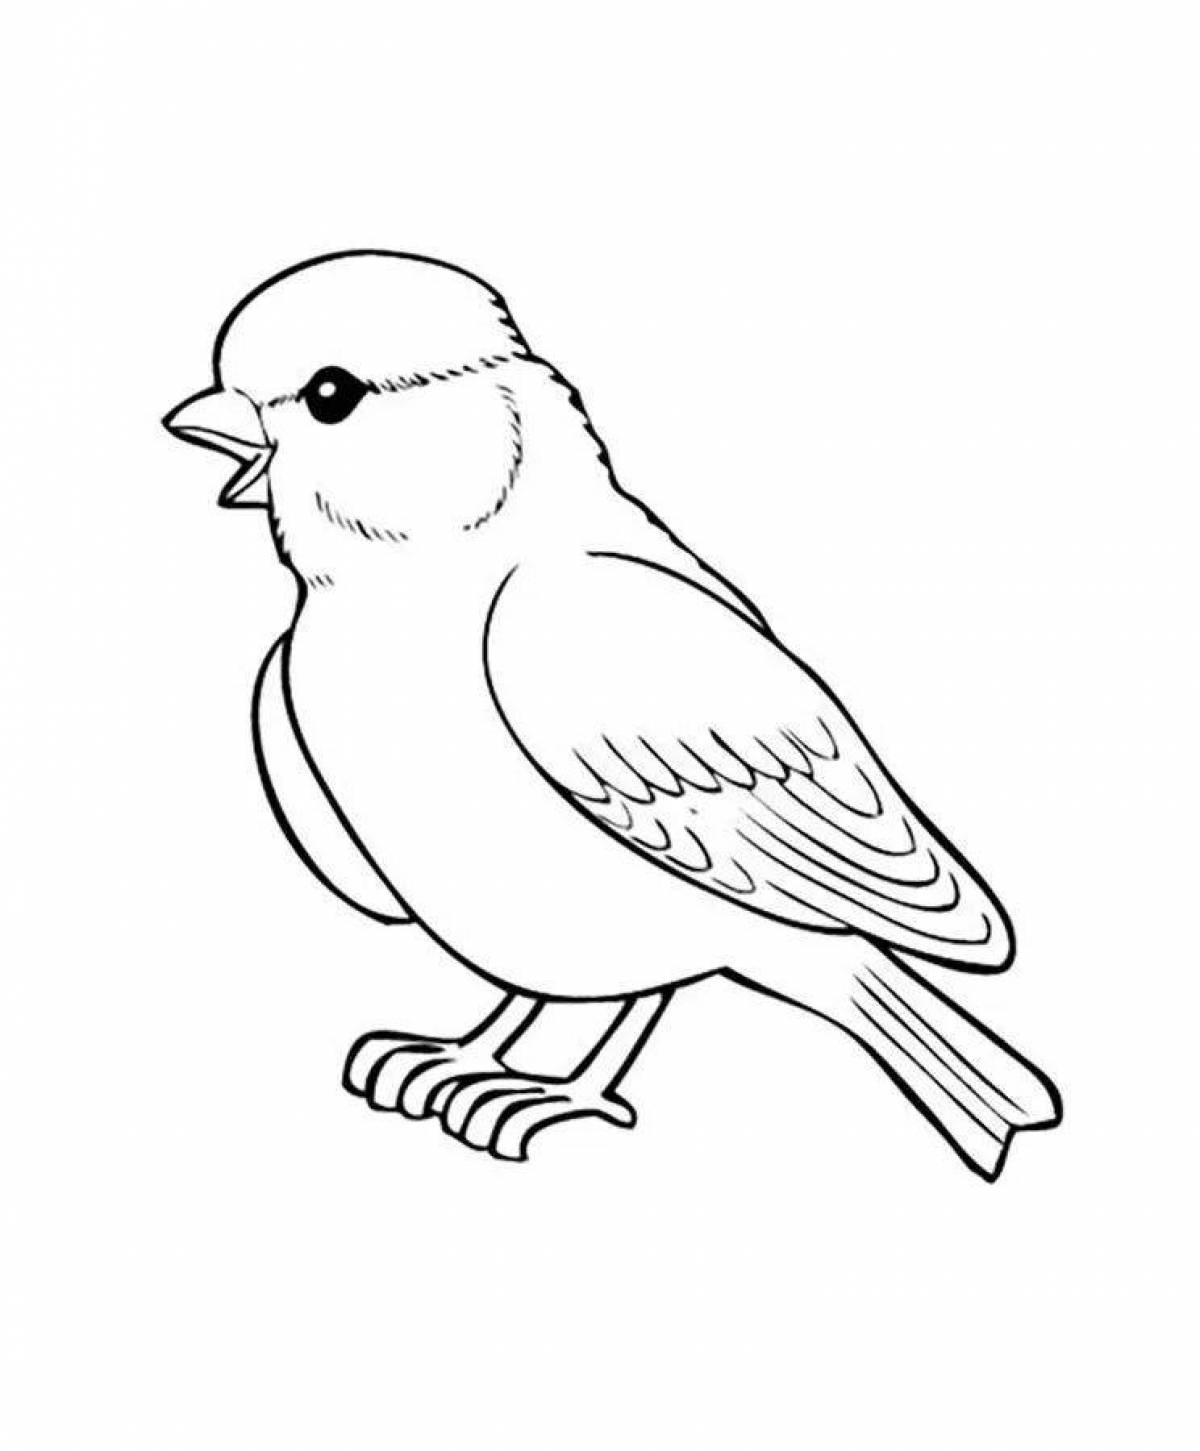 Charming sparrows coloring book